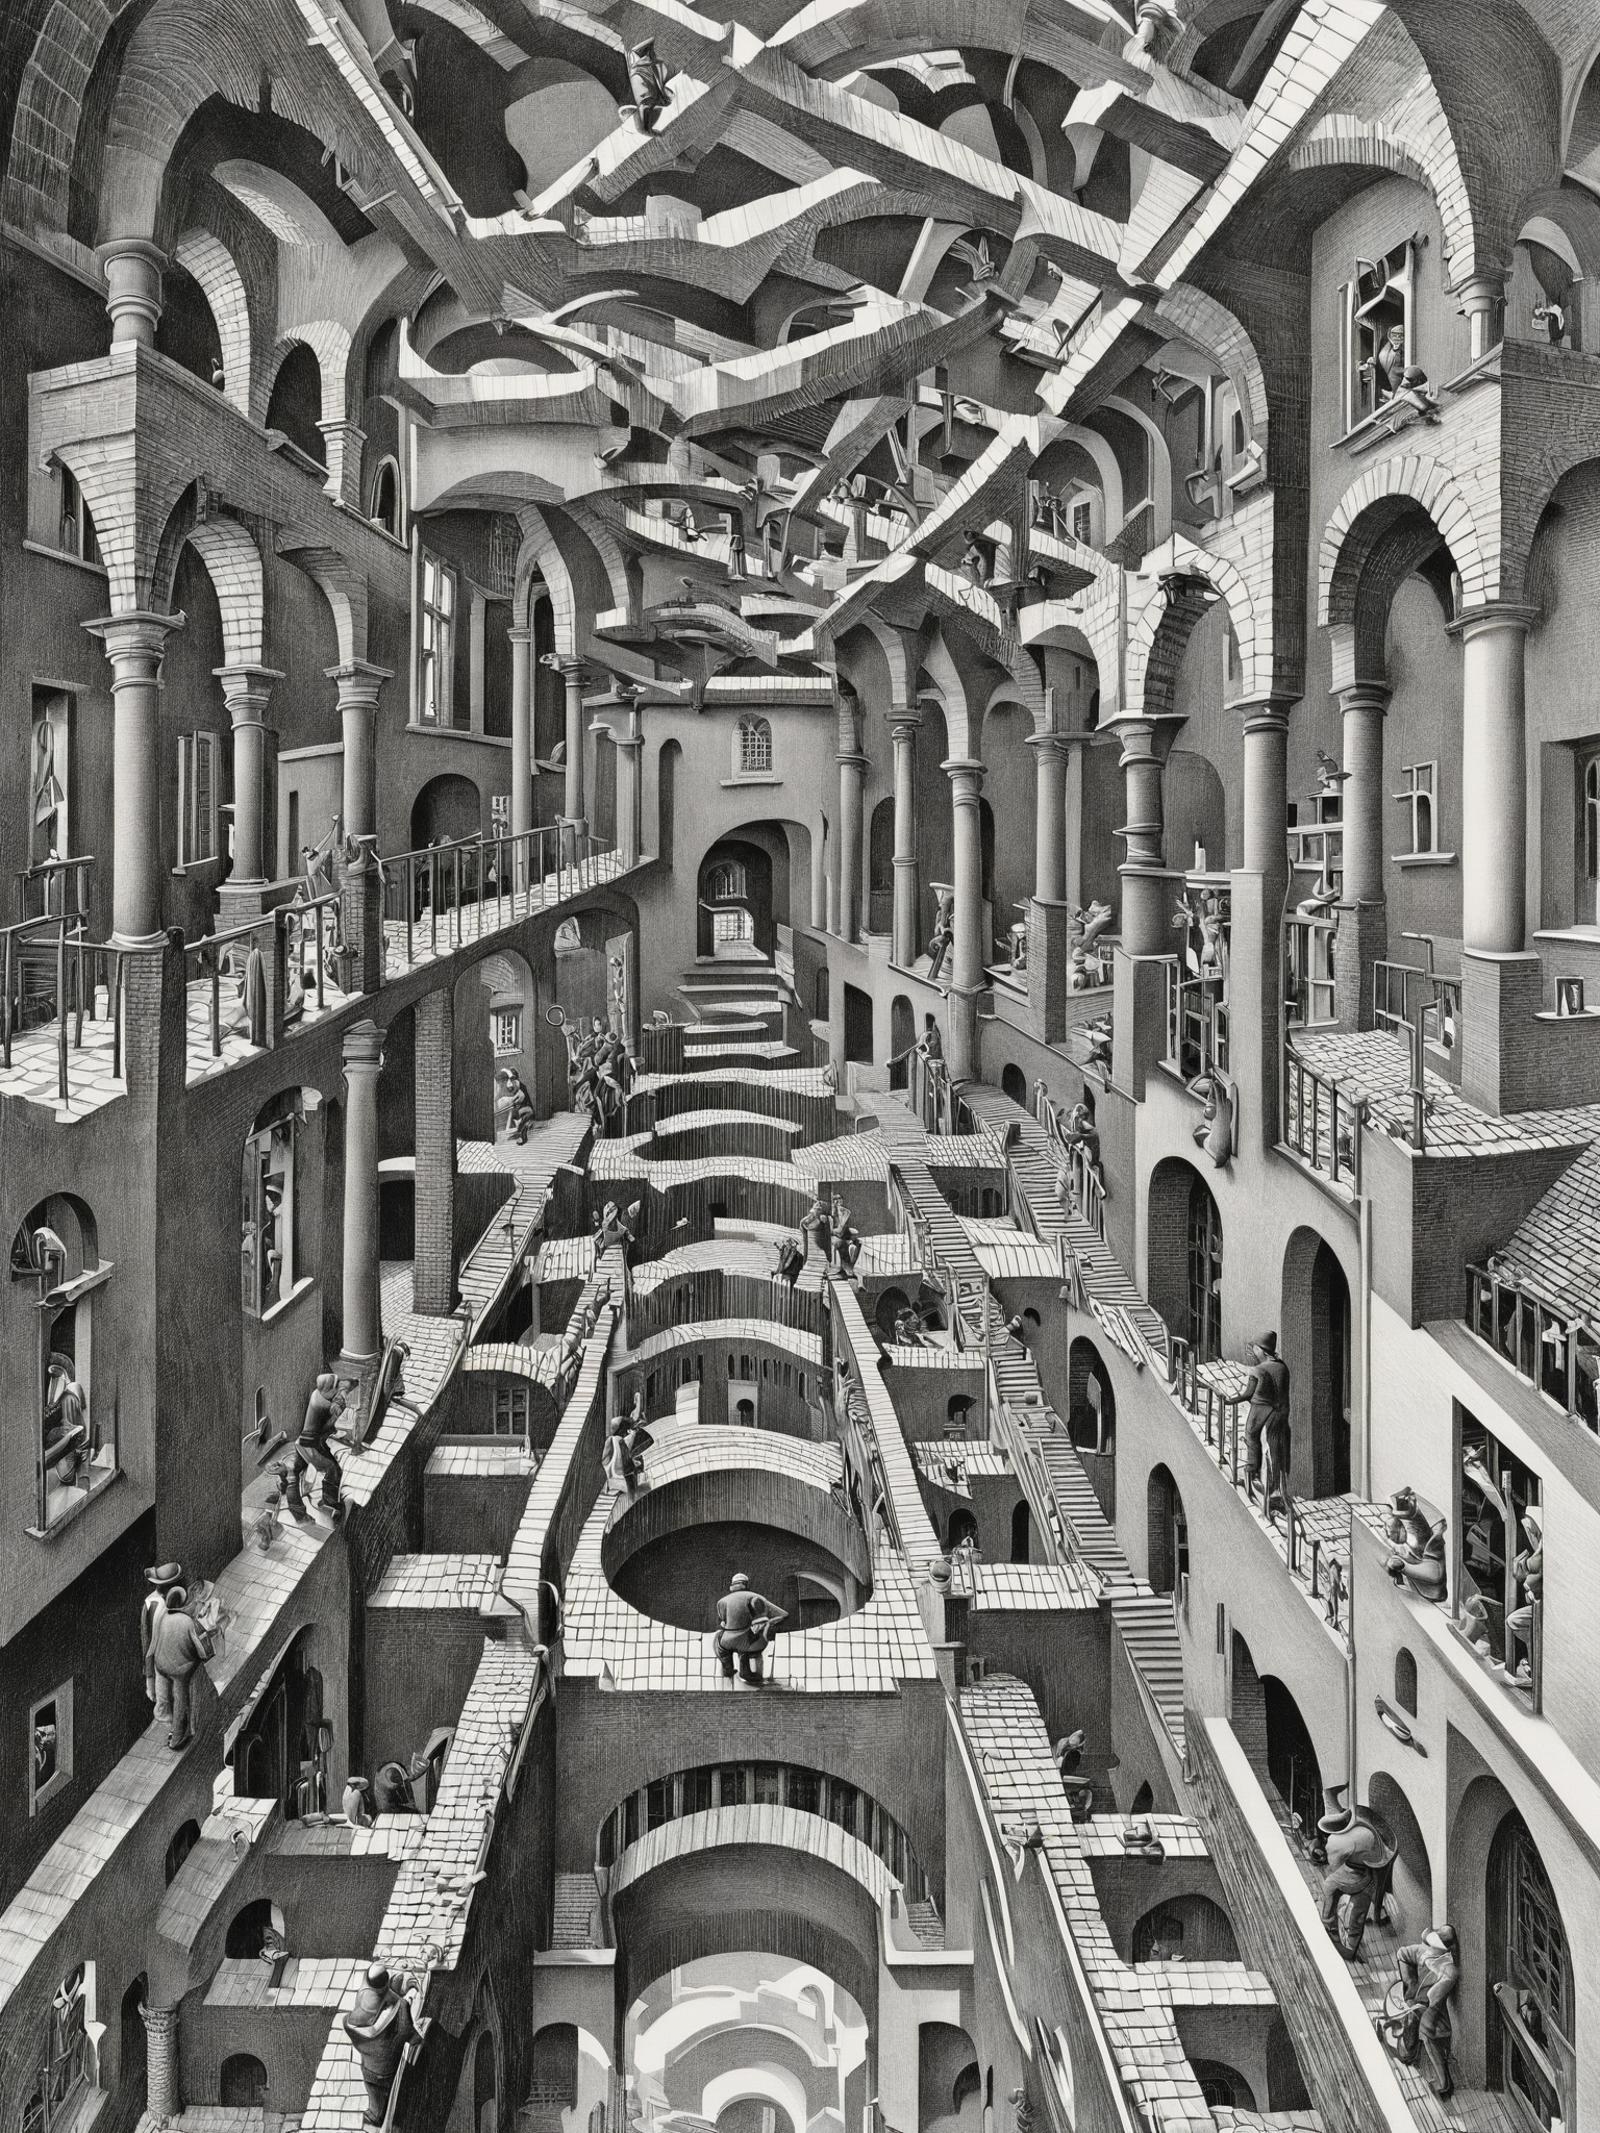 A surreal black and white drawing of a maze-like structure with people walking through it.